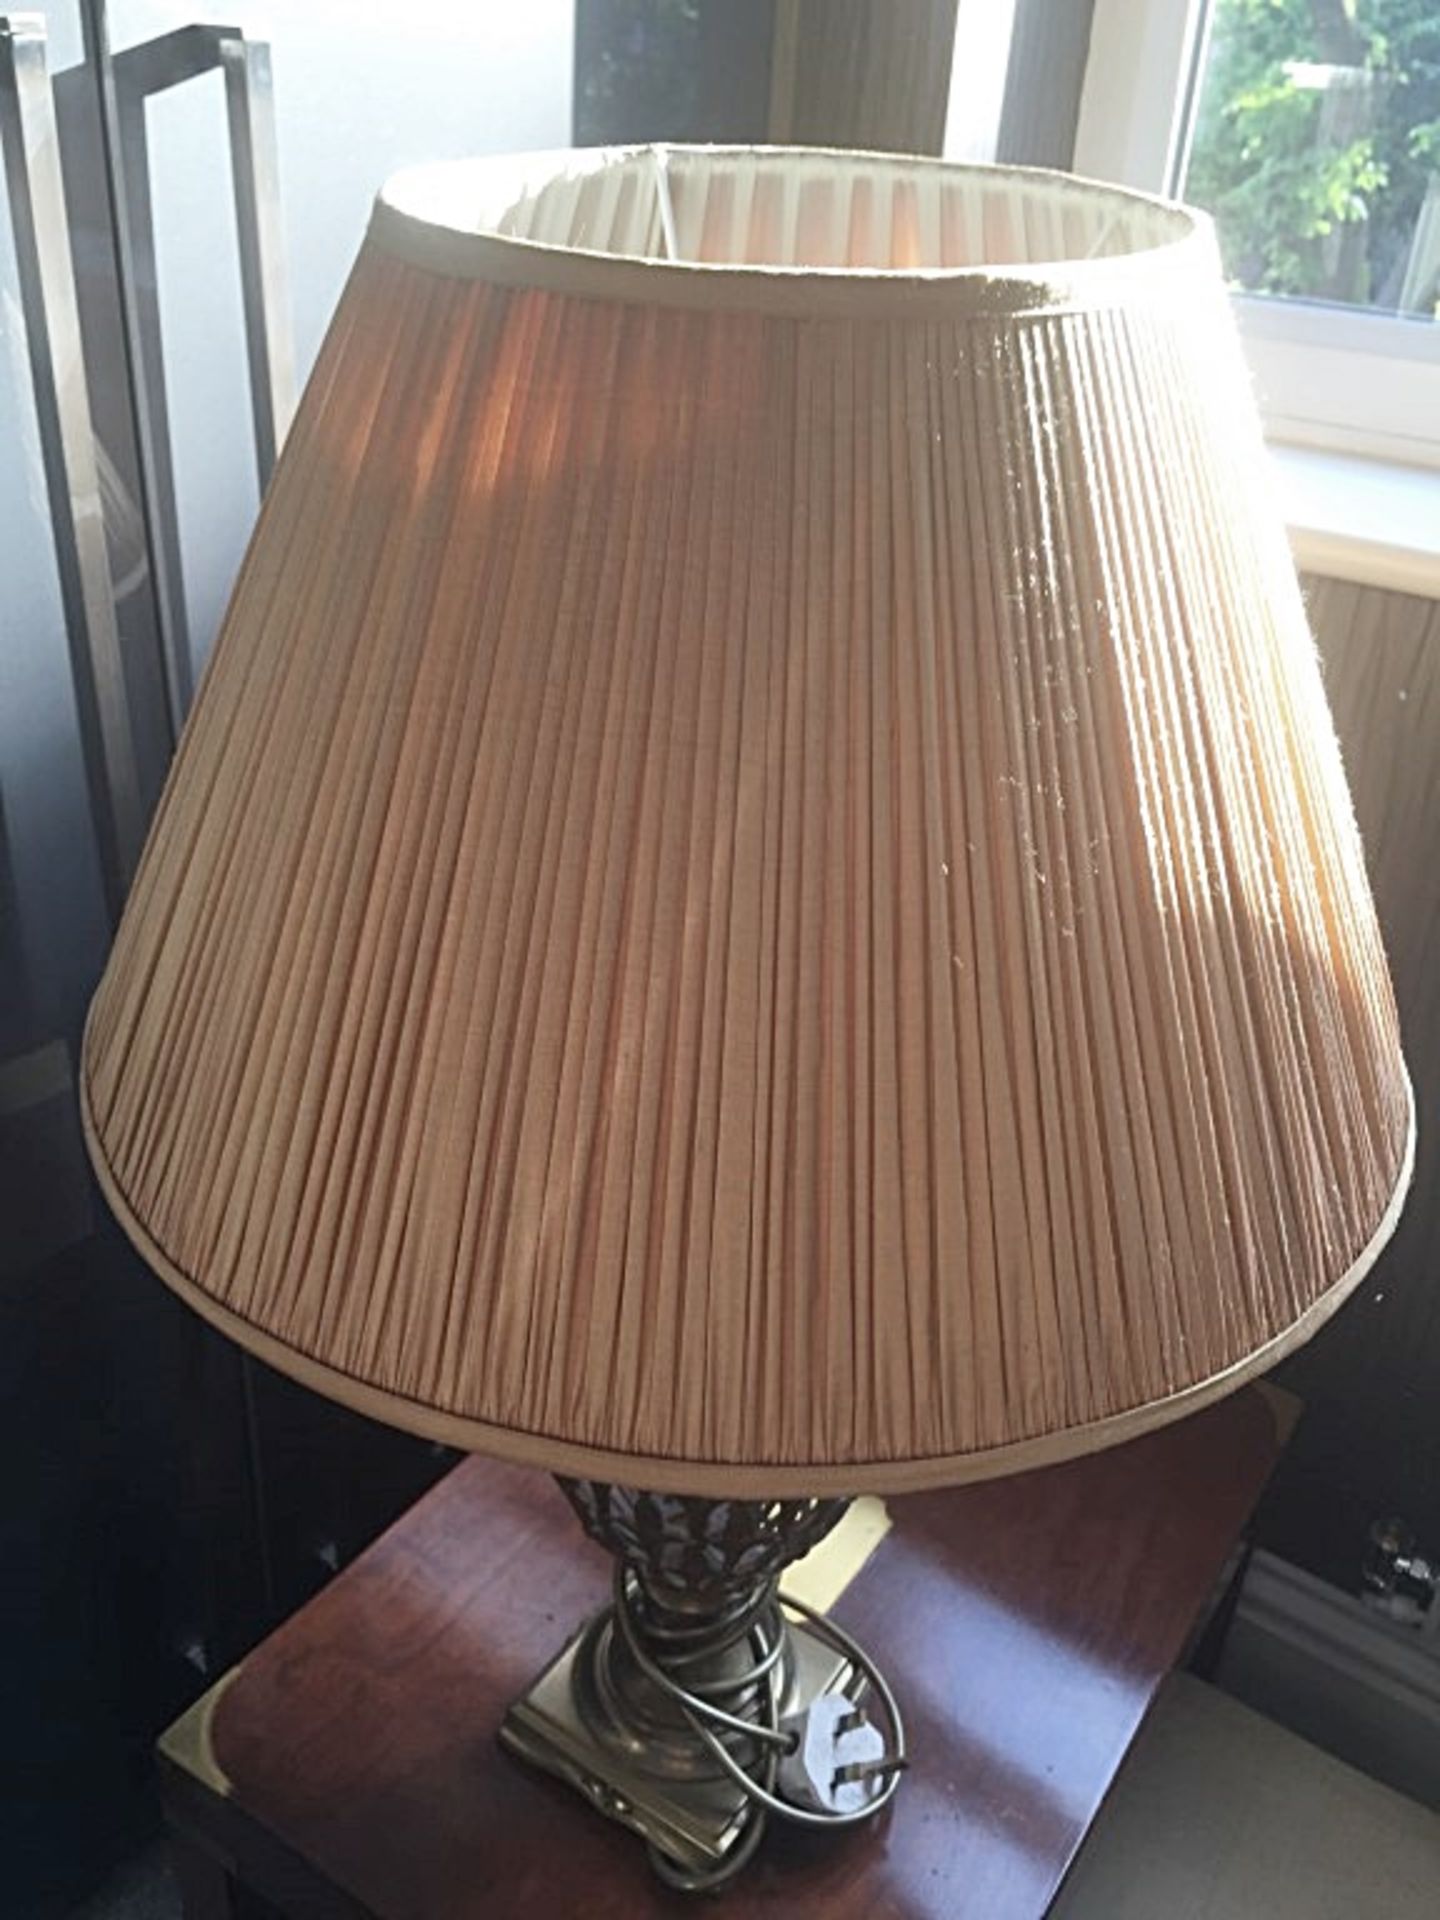 1 x Ornate Metal Table Lamp With Shade - Dimensions: 67cm x Base 13 x 13cm - Pre-owned In Very - Image 5 of 7